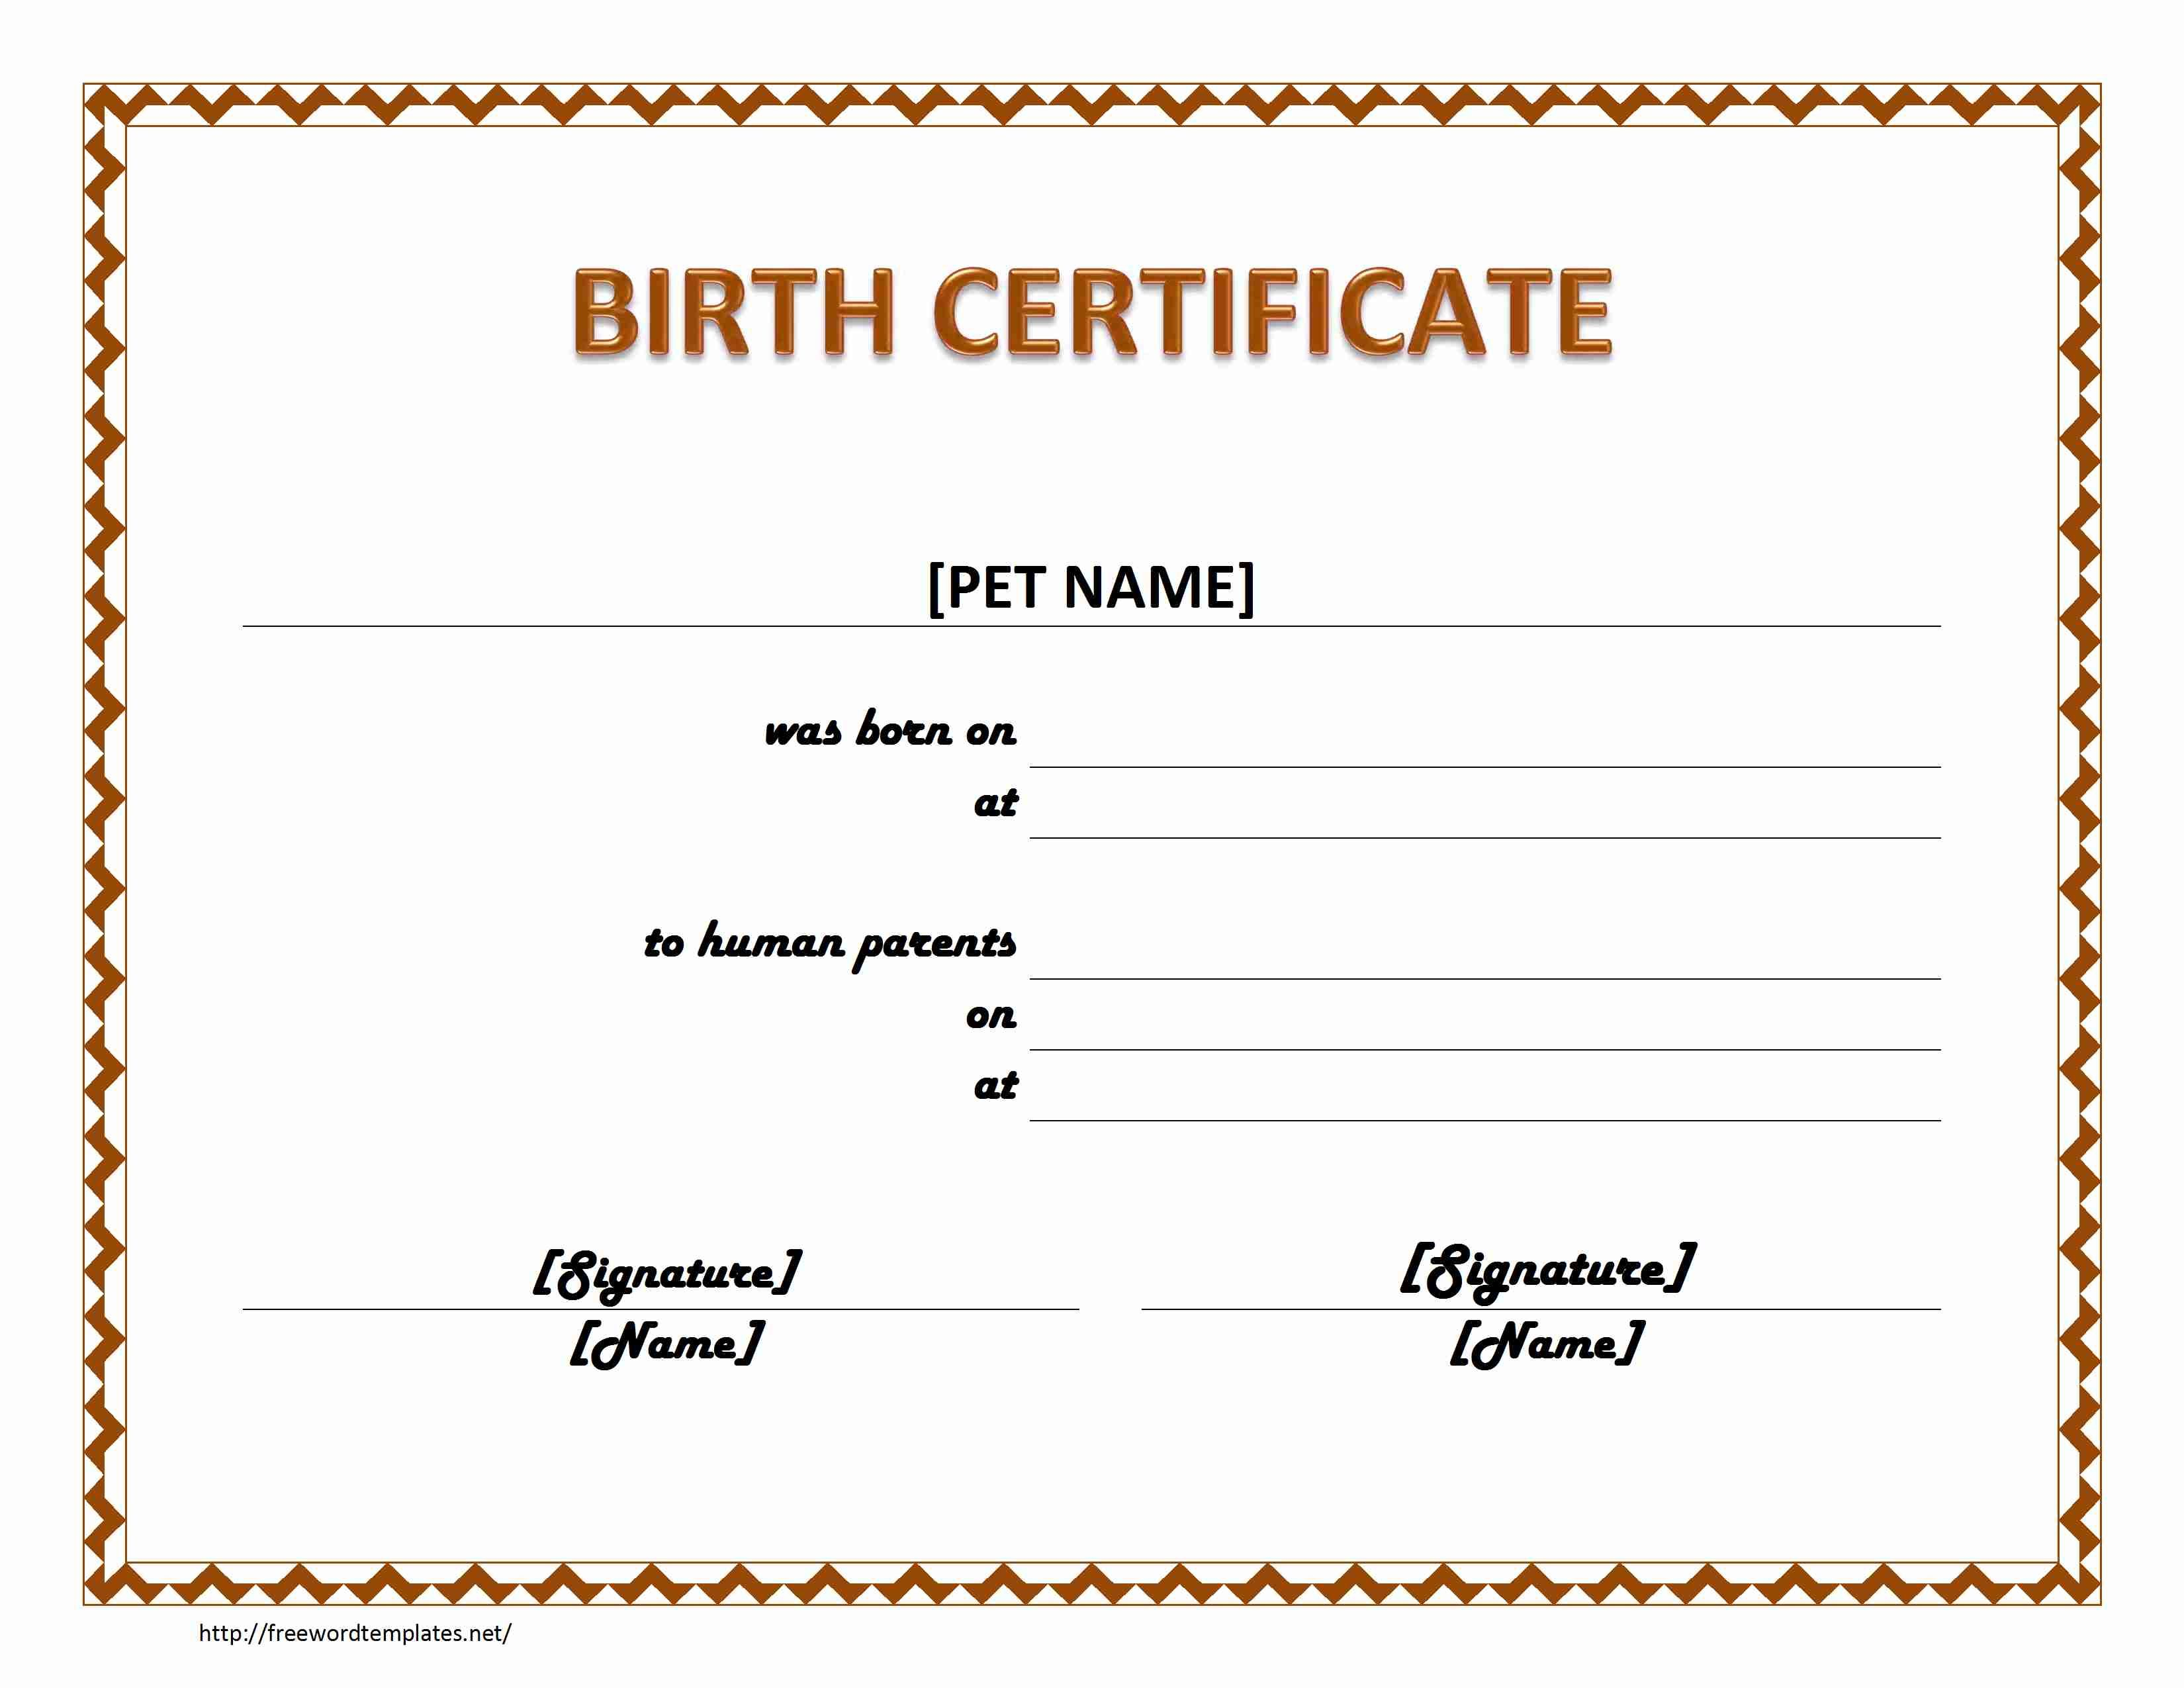 Pet Birth Certificate Maker | Pet Birth Certificate For Word With Regard To Child Adoption Certificate Template